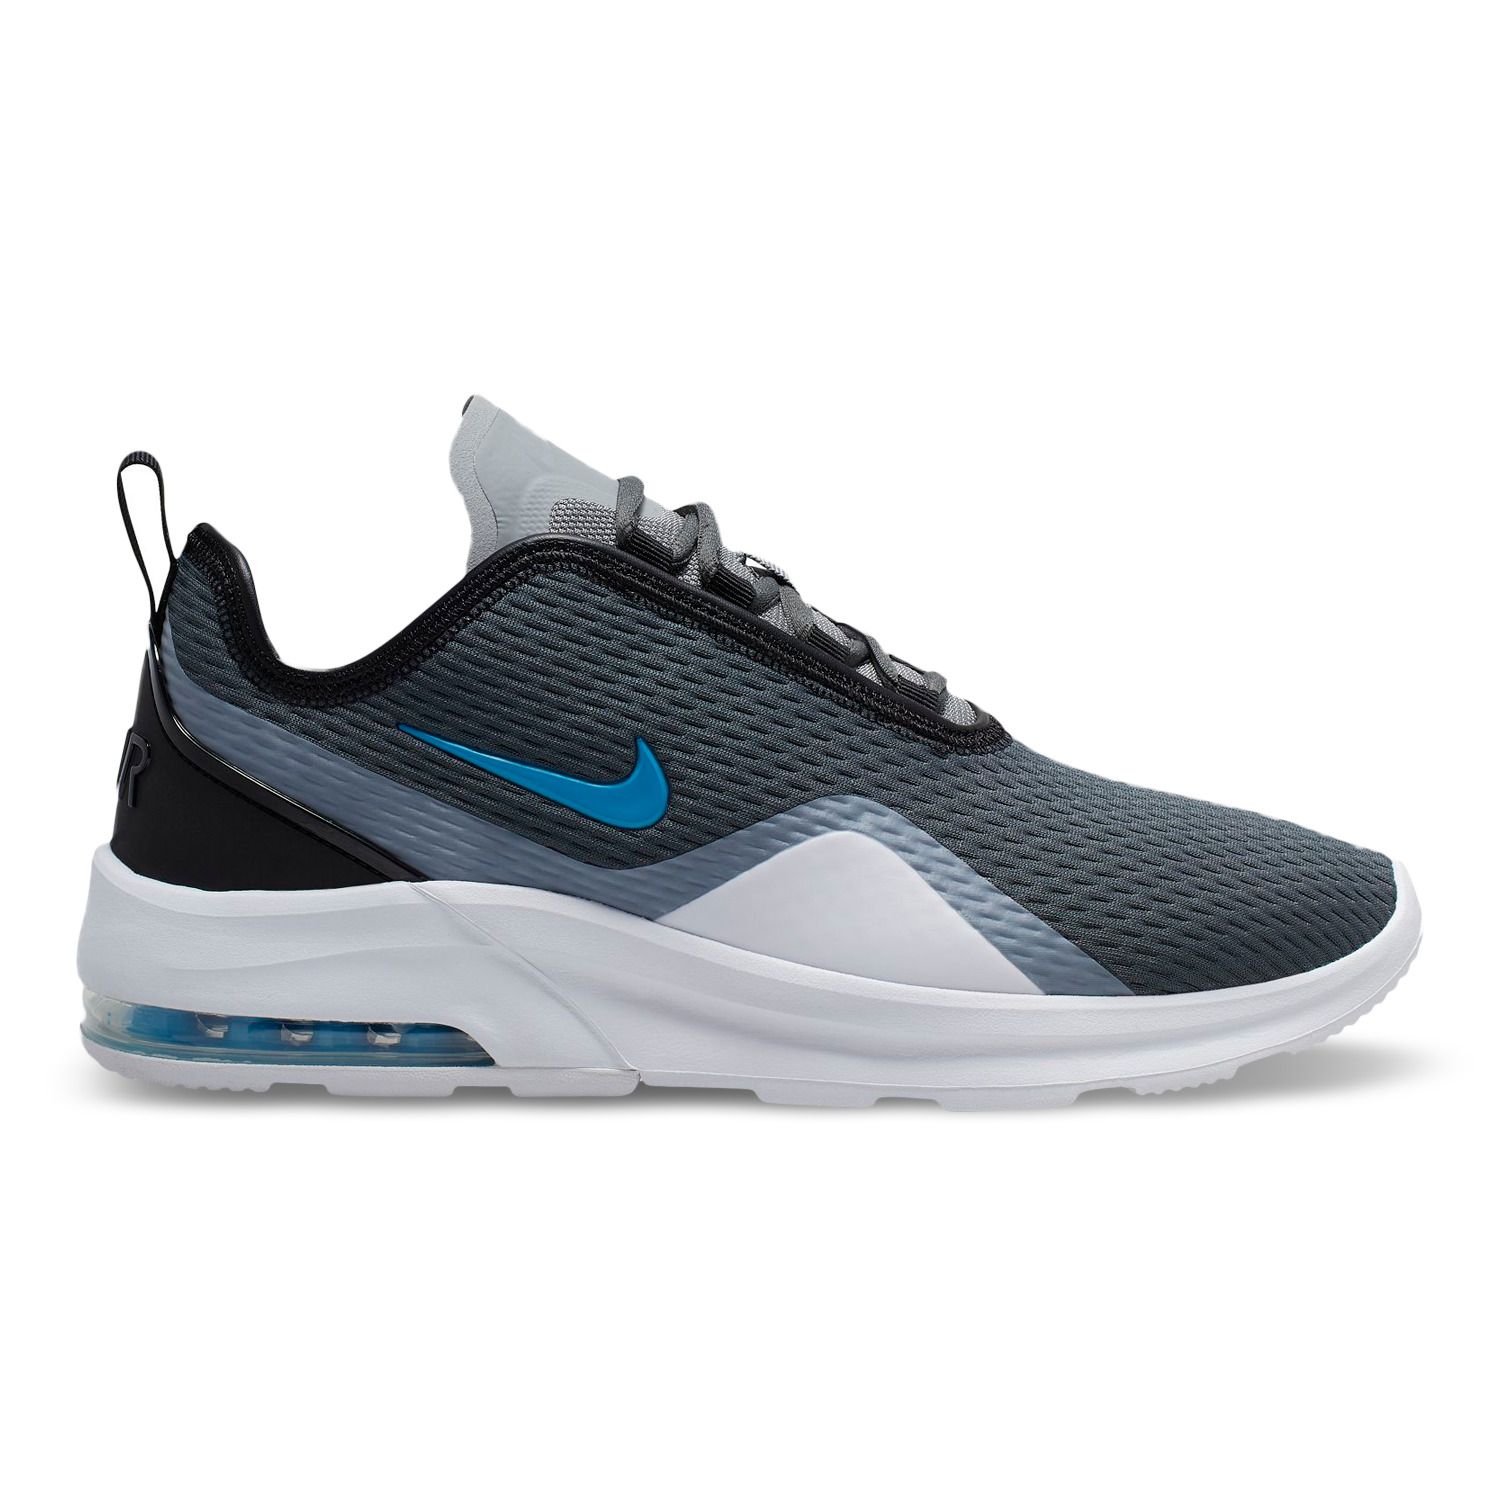 Nike Air Max Motion 2 Men's Running Shoes